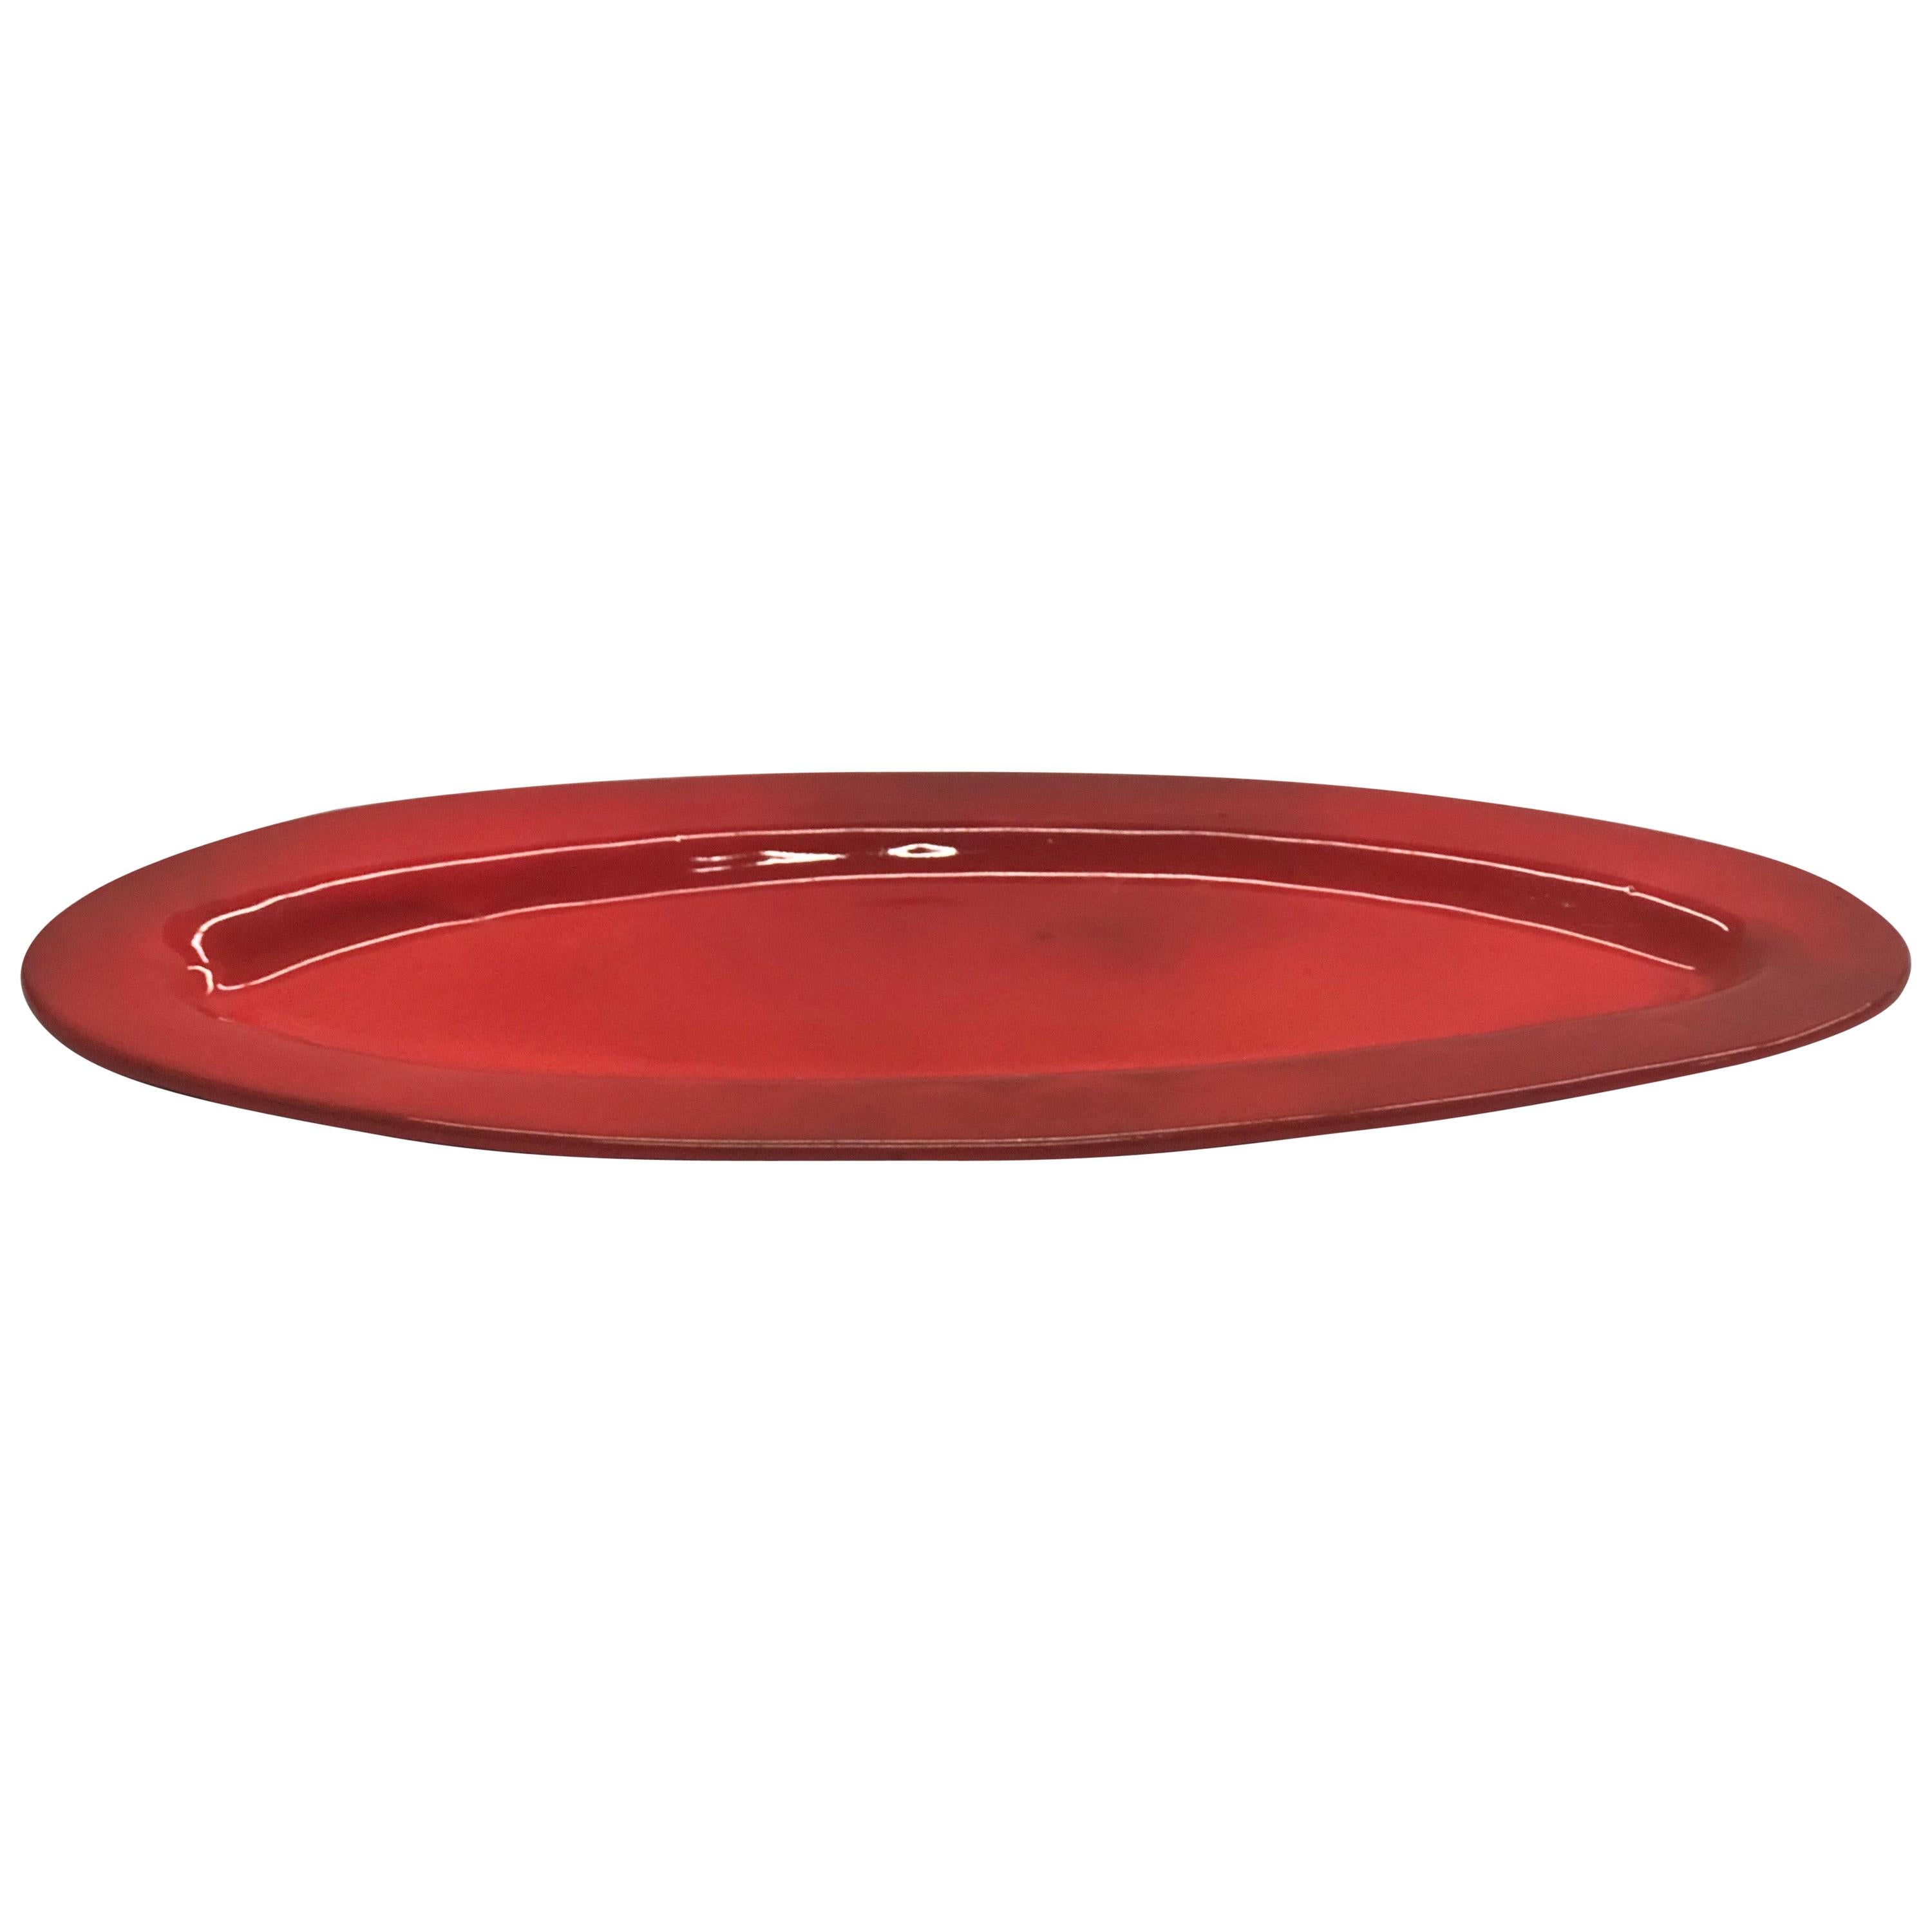 Large French Midcentury Oval Red Ceramic Serving Platter by Voltz, Vallauris For Sale